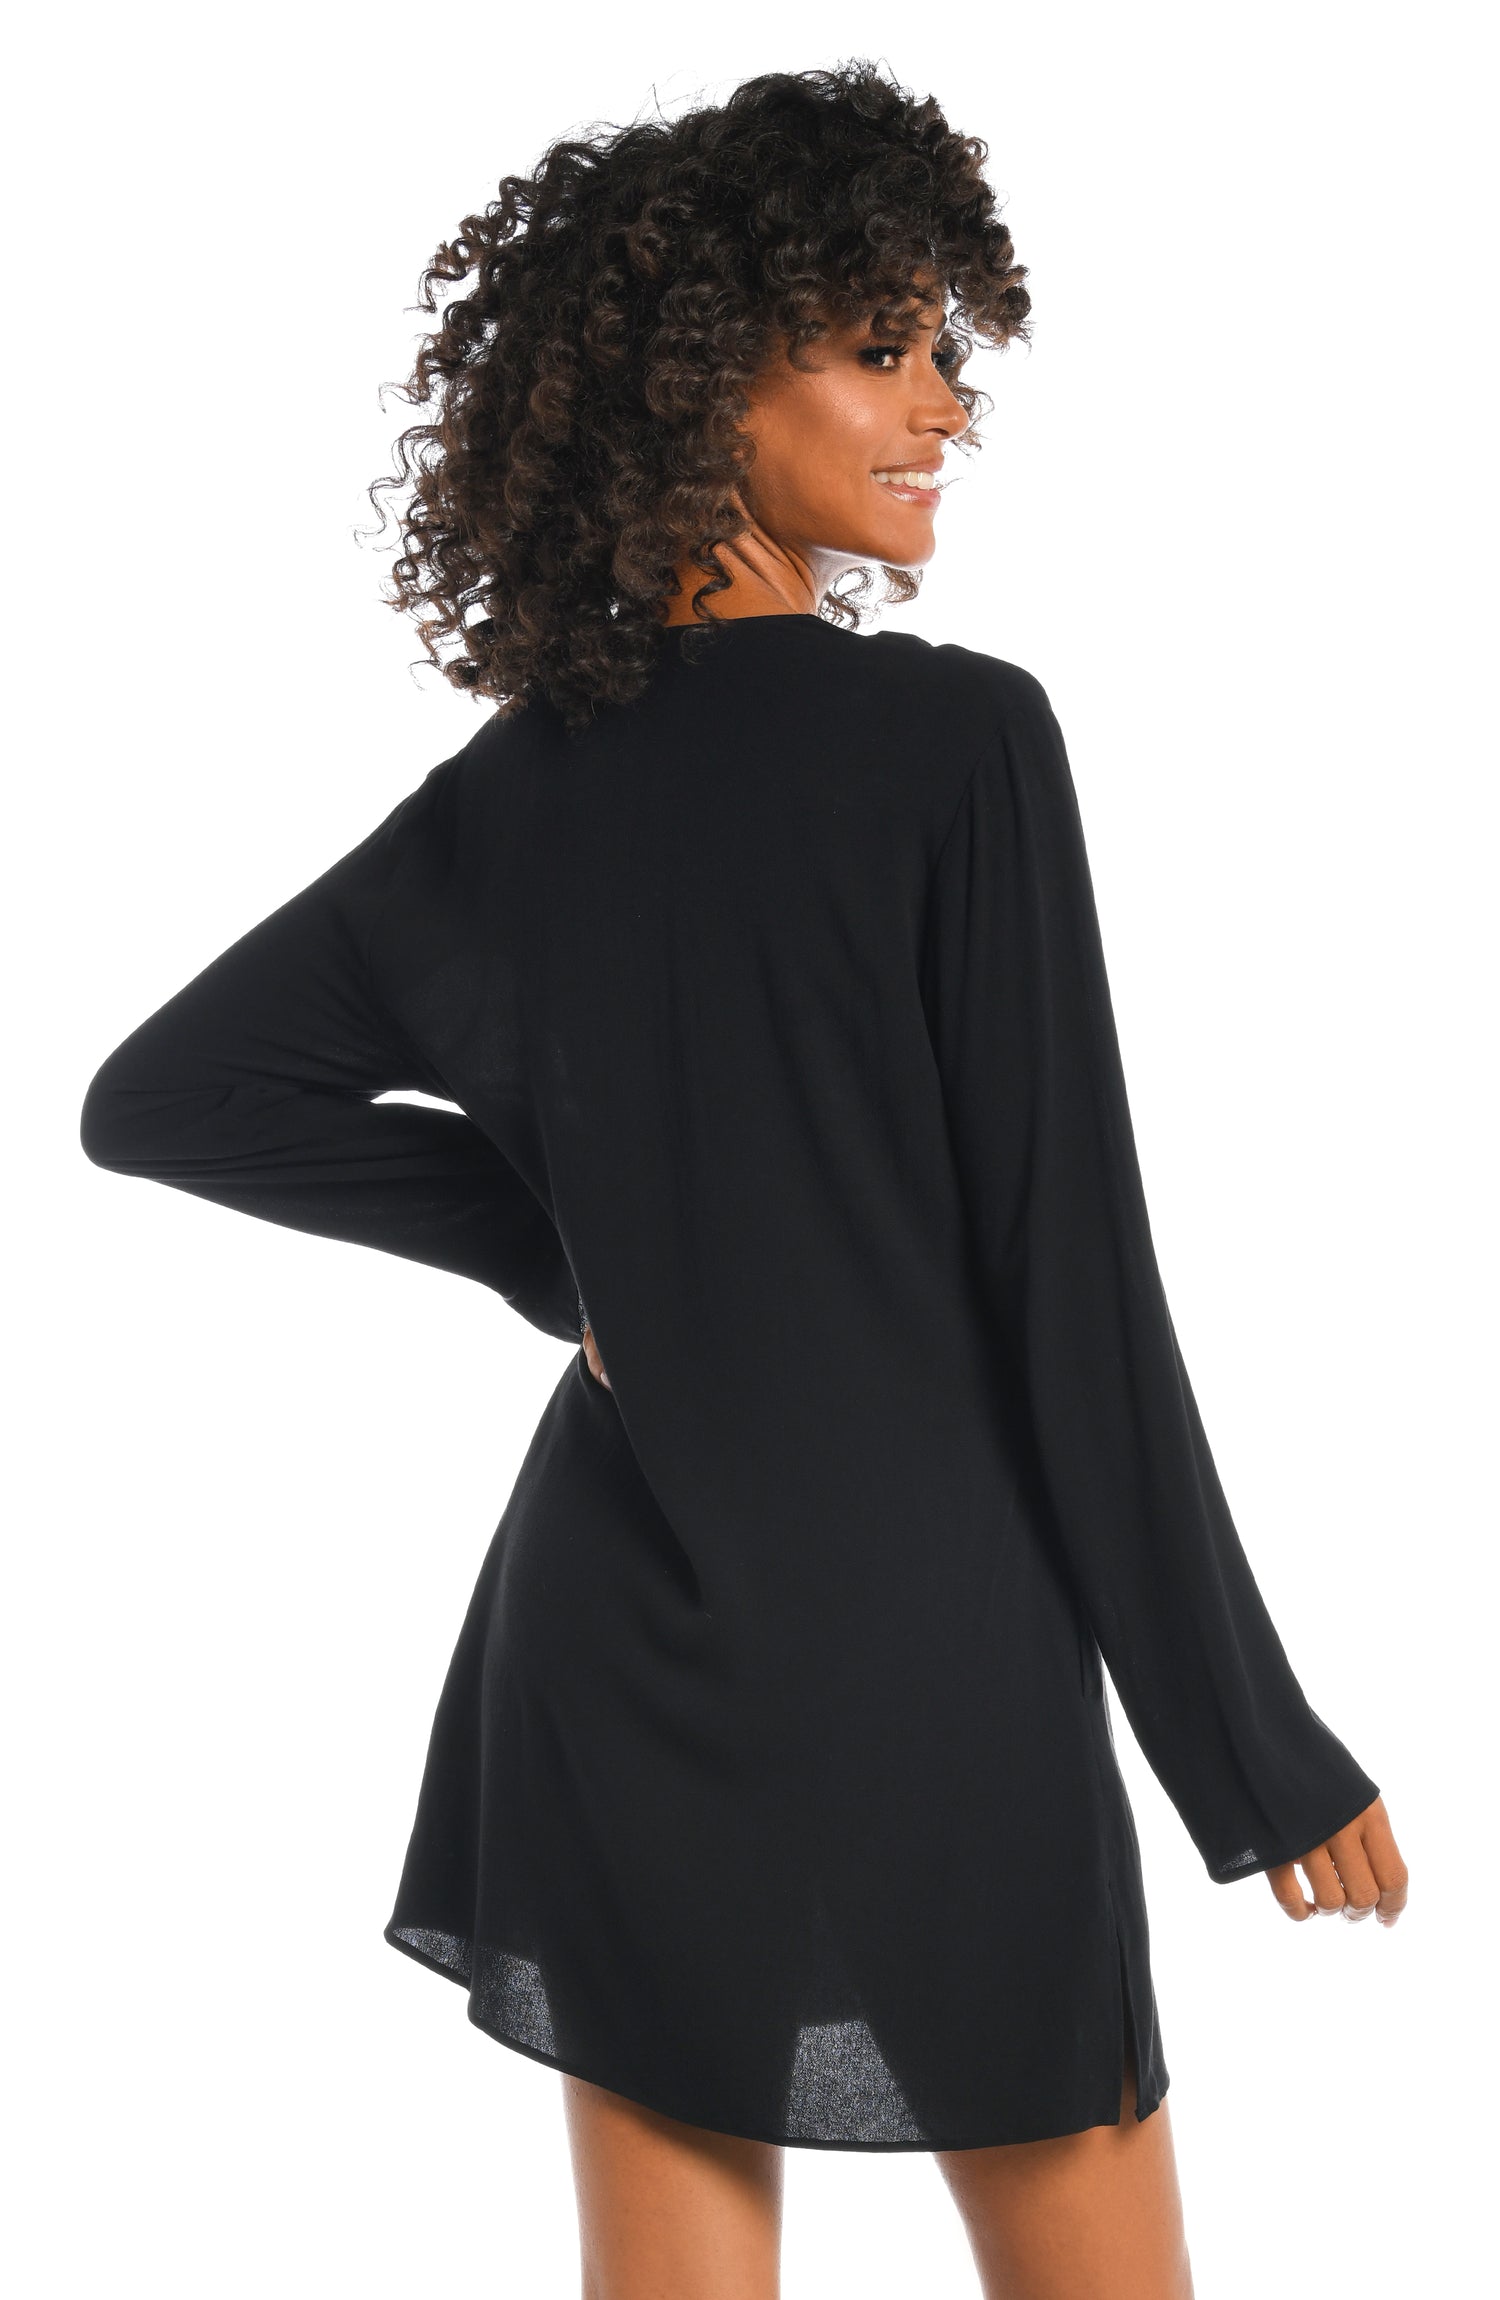 Model is wearing a solid black v-neck tunic over up from our Beachcomber Basics collection!